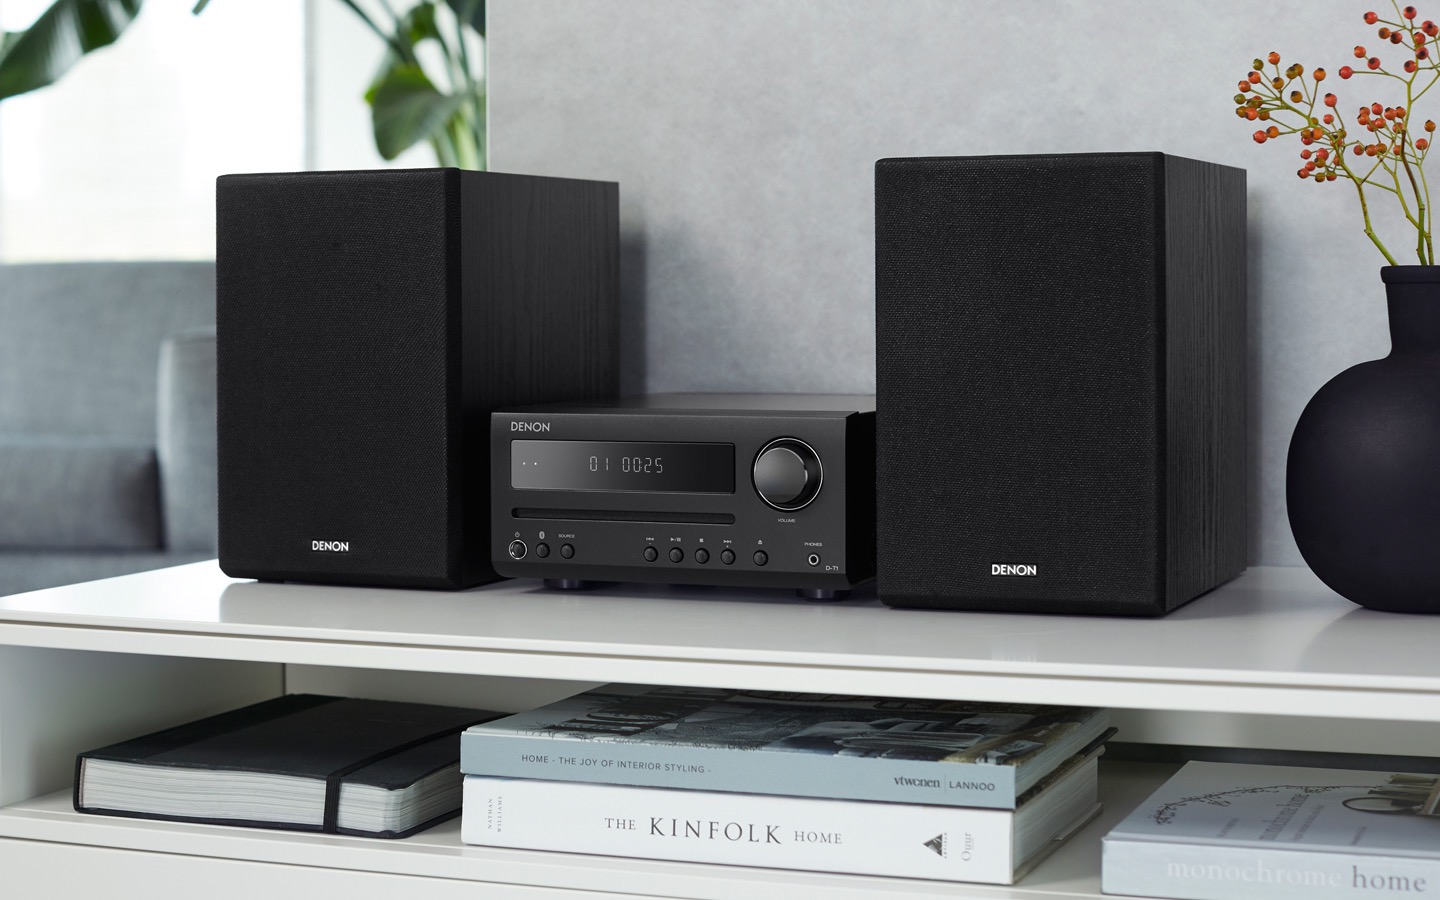 How To Set Up Home Stereo System